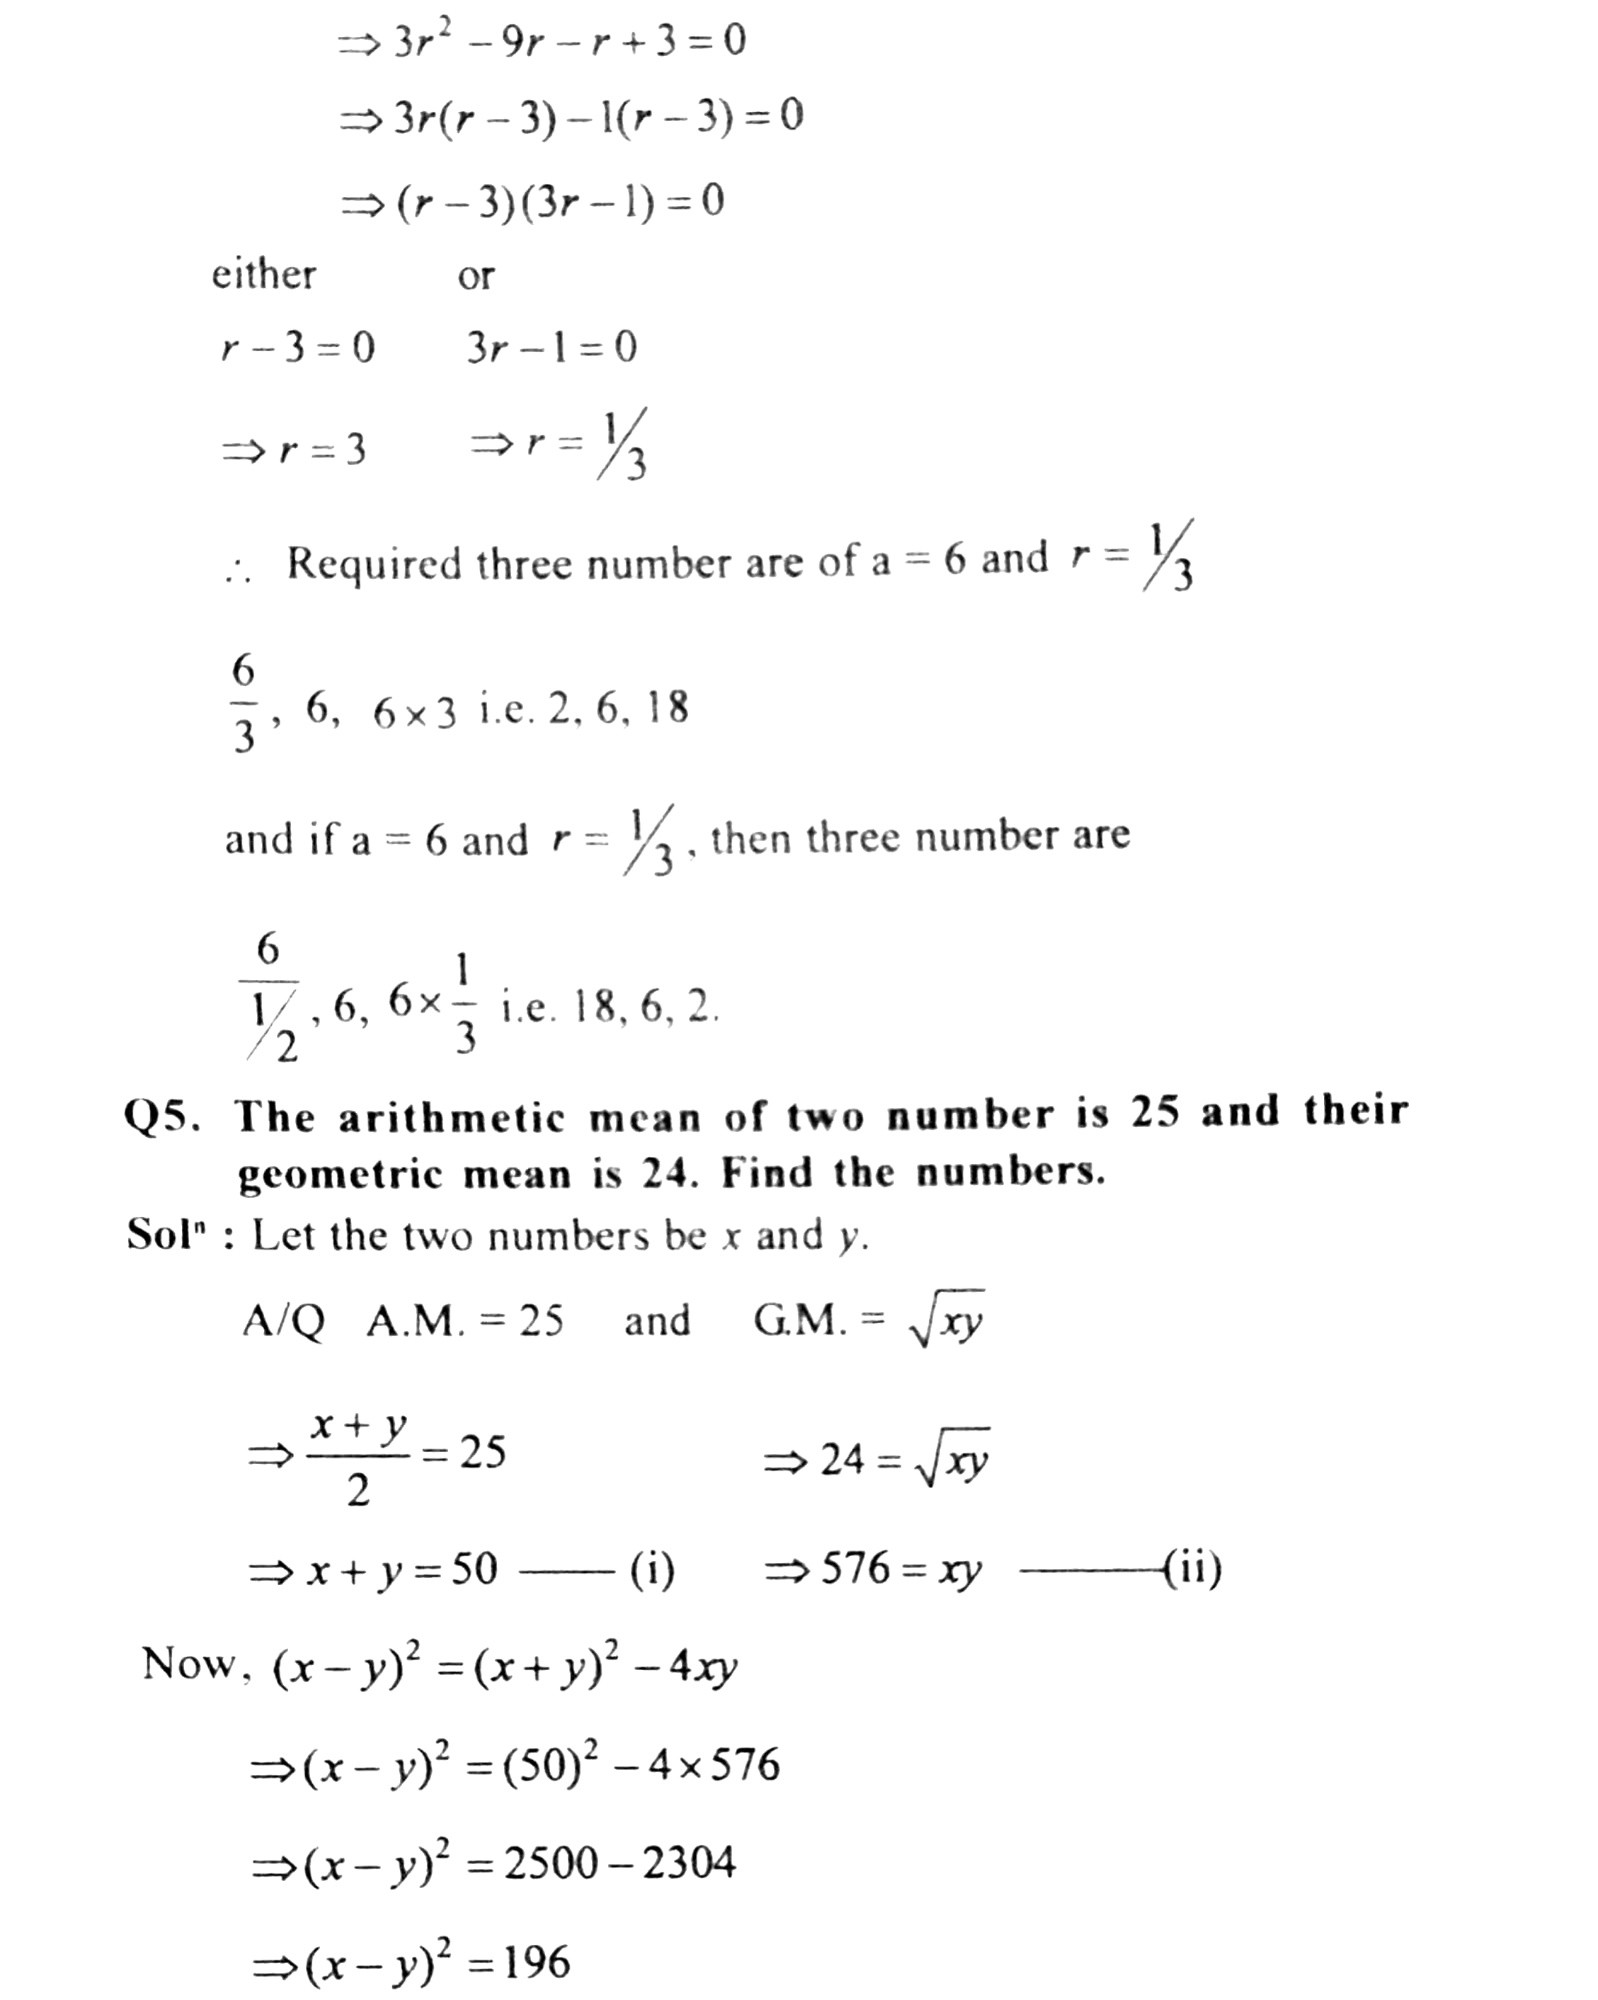 Arithmetic and geometric progression, gauhati University business mathematics Arithmetic and geometric progression unit 5 , b.com 4th sem business mathematics Unit 5 notes and solutions